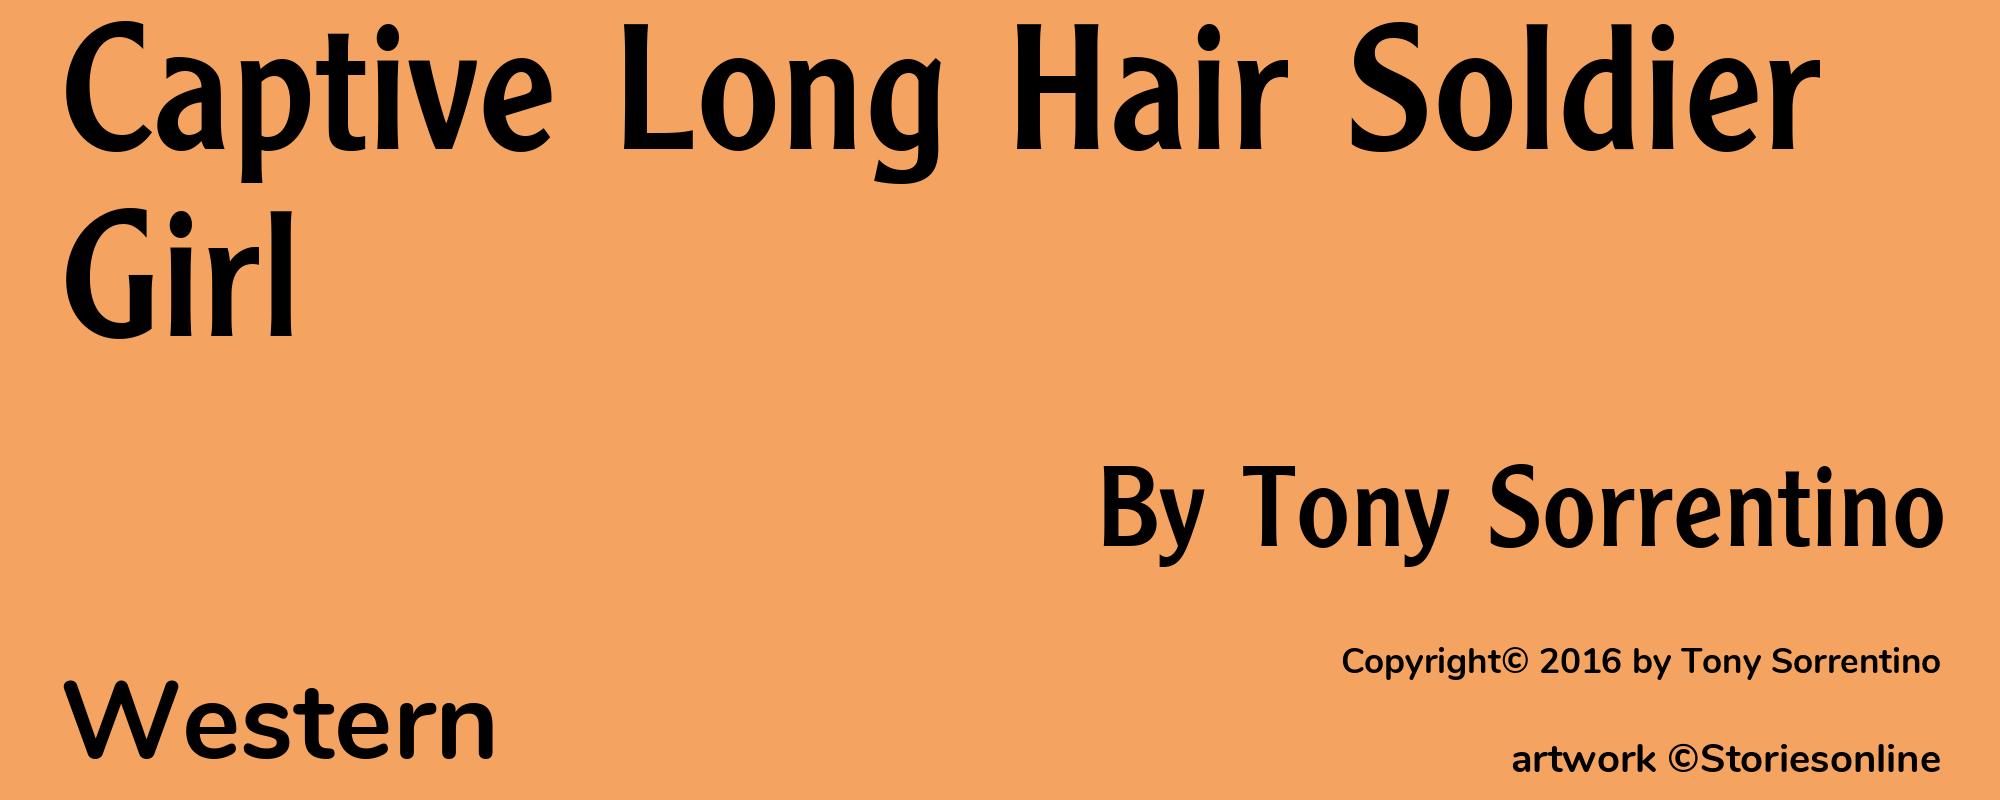 Captive Long Hair Soldier Girl - Cover